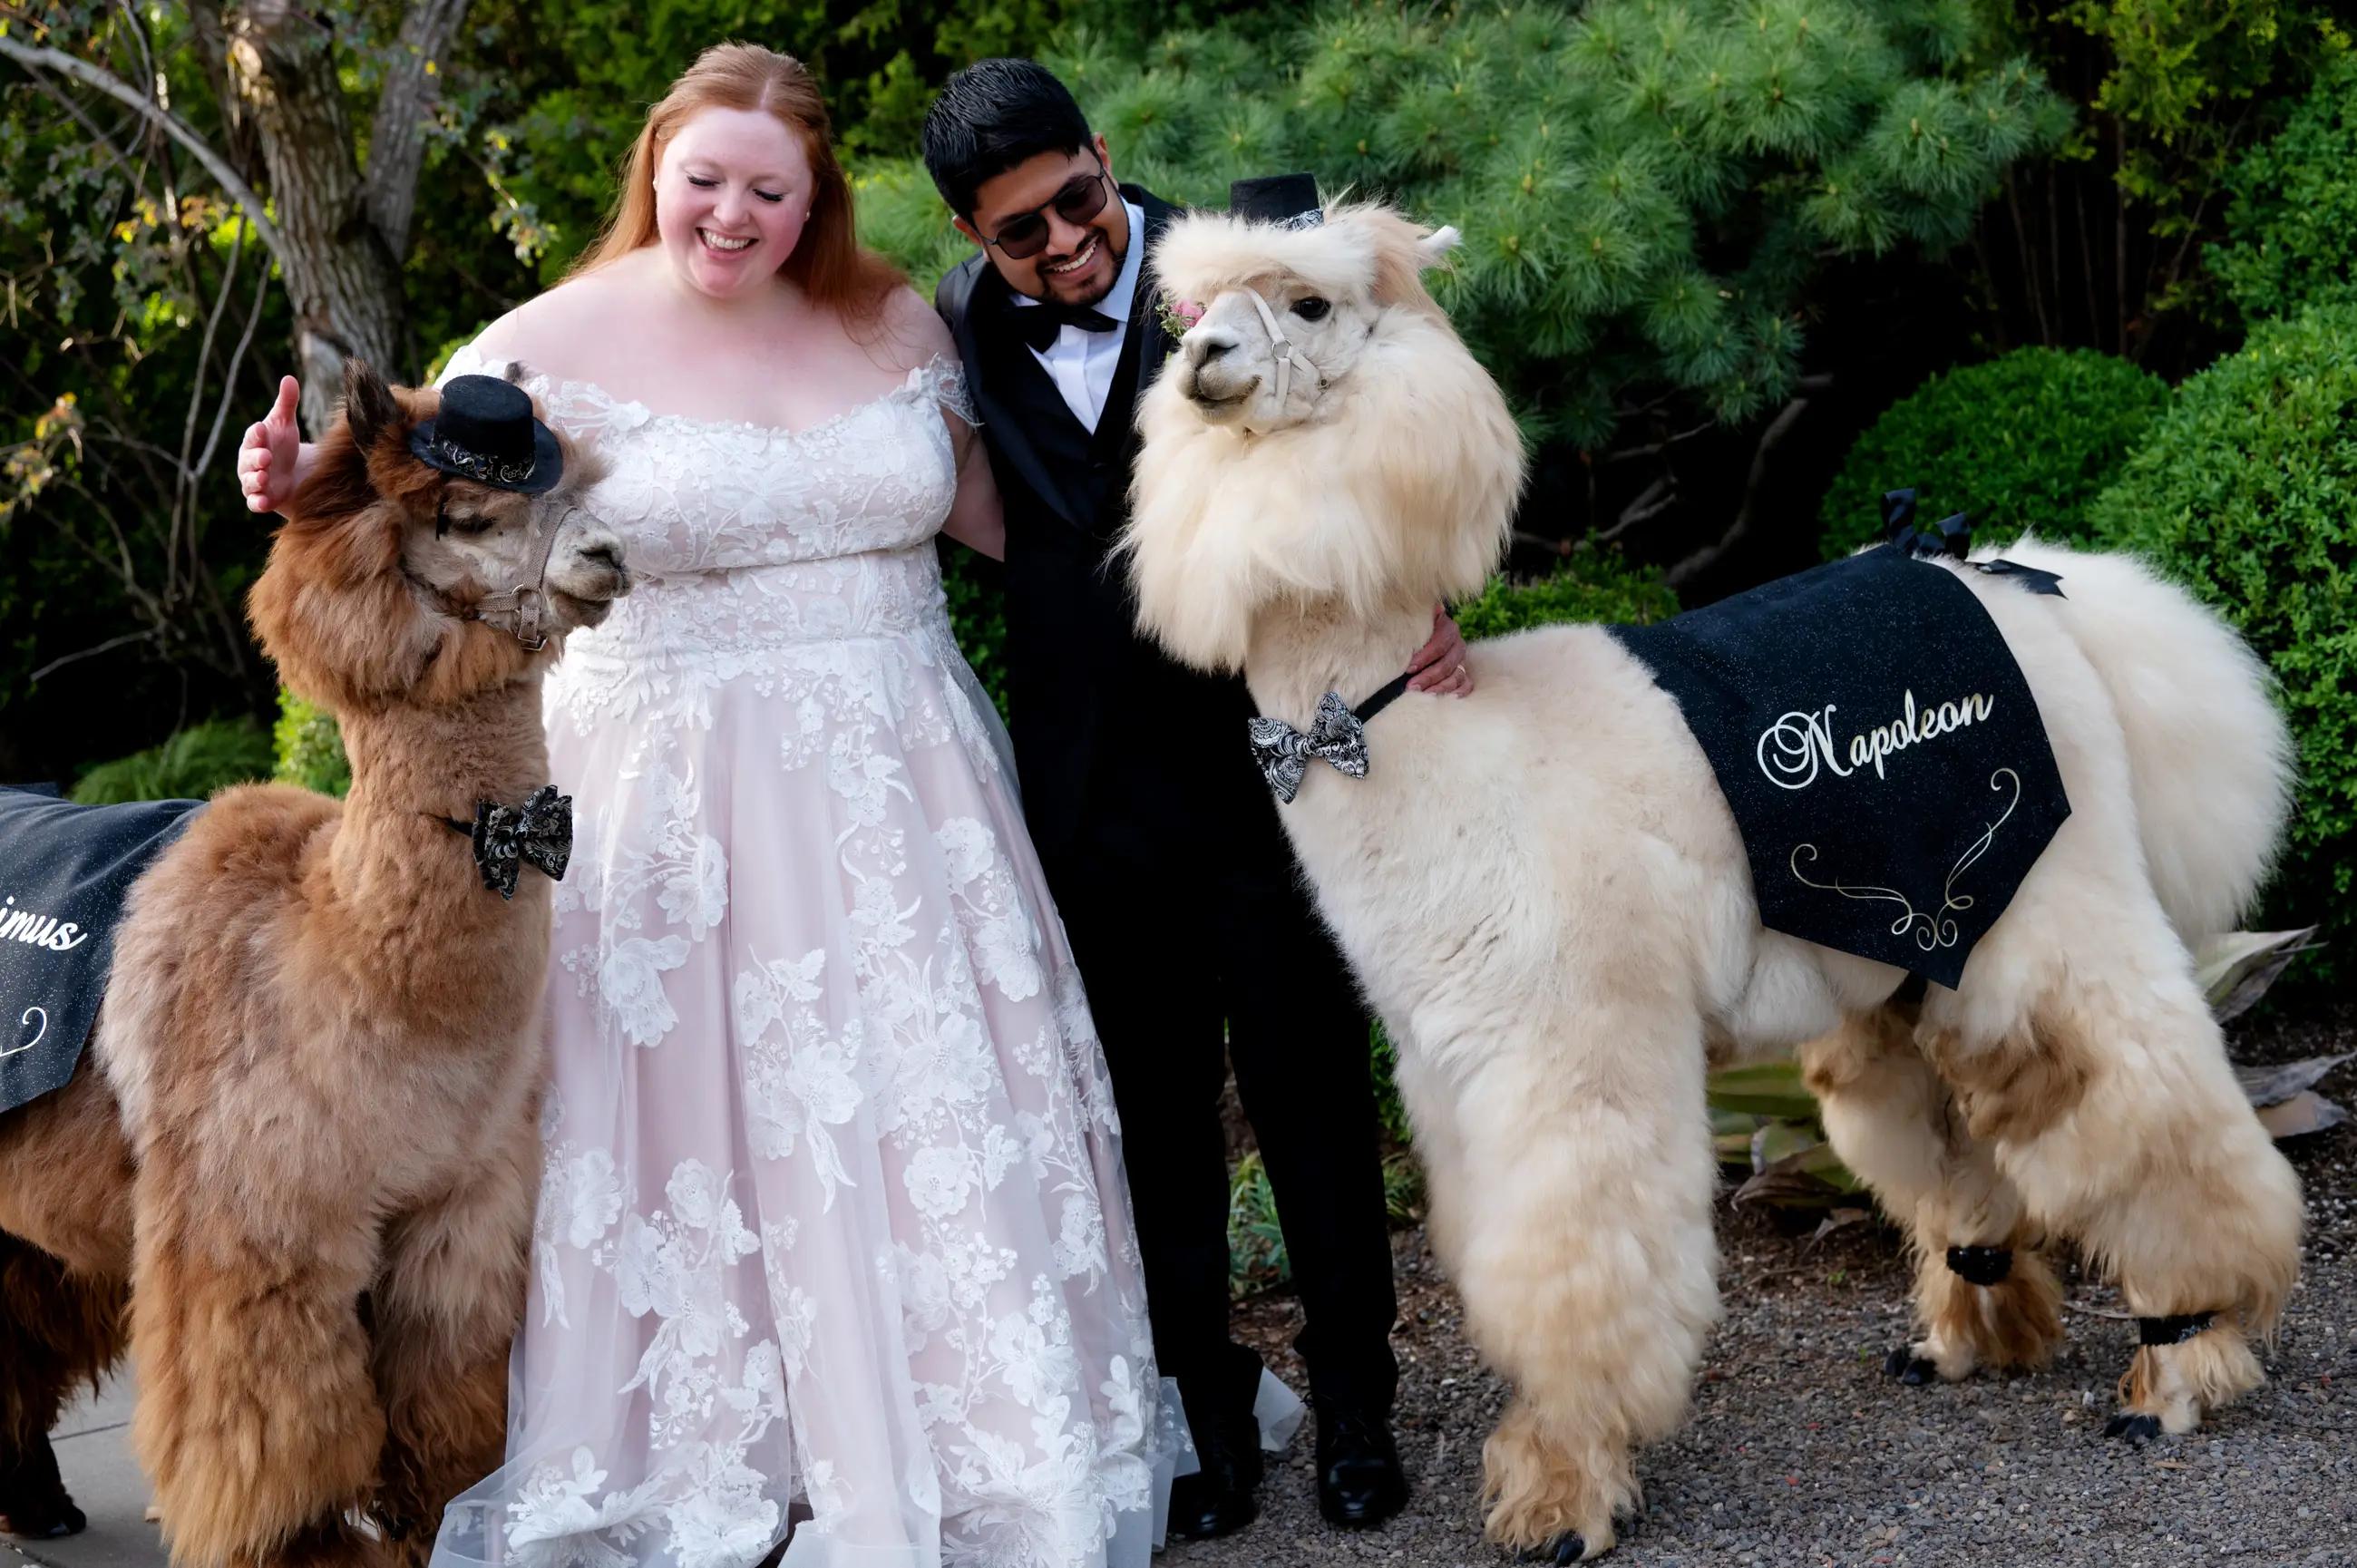 Bride and Groom with Llamas from Classy Camelids